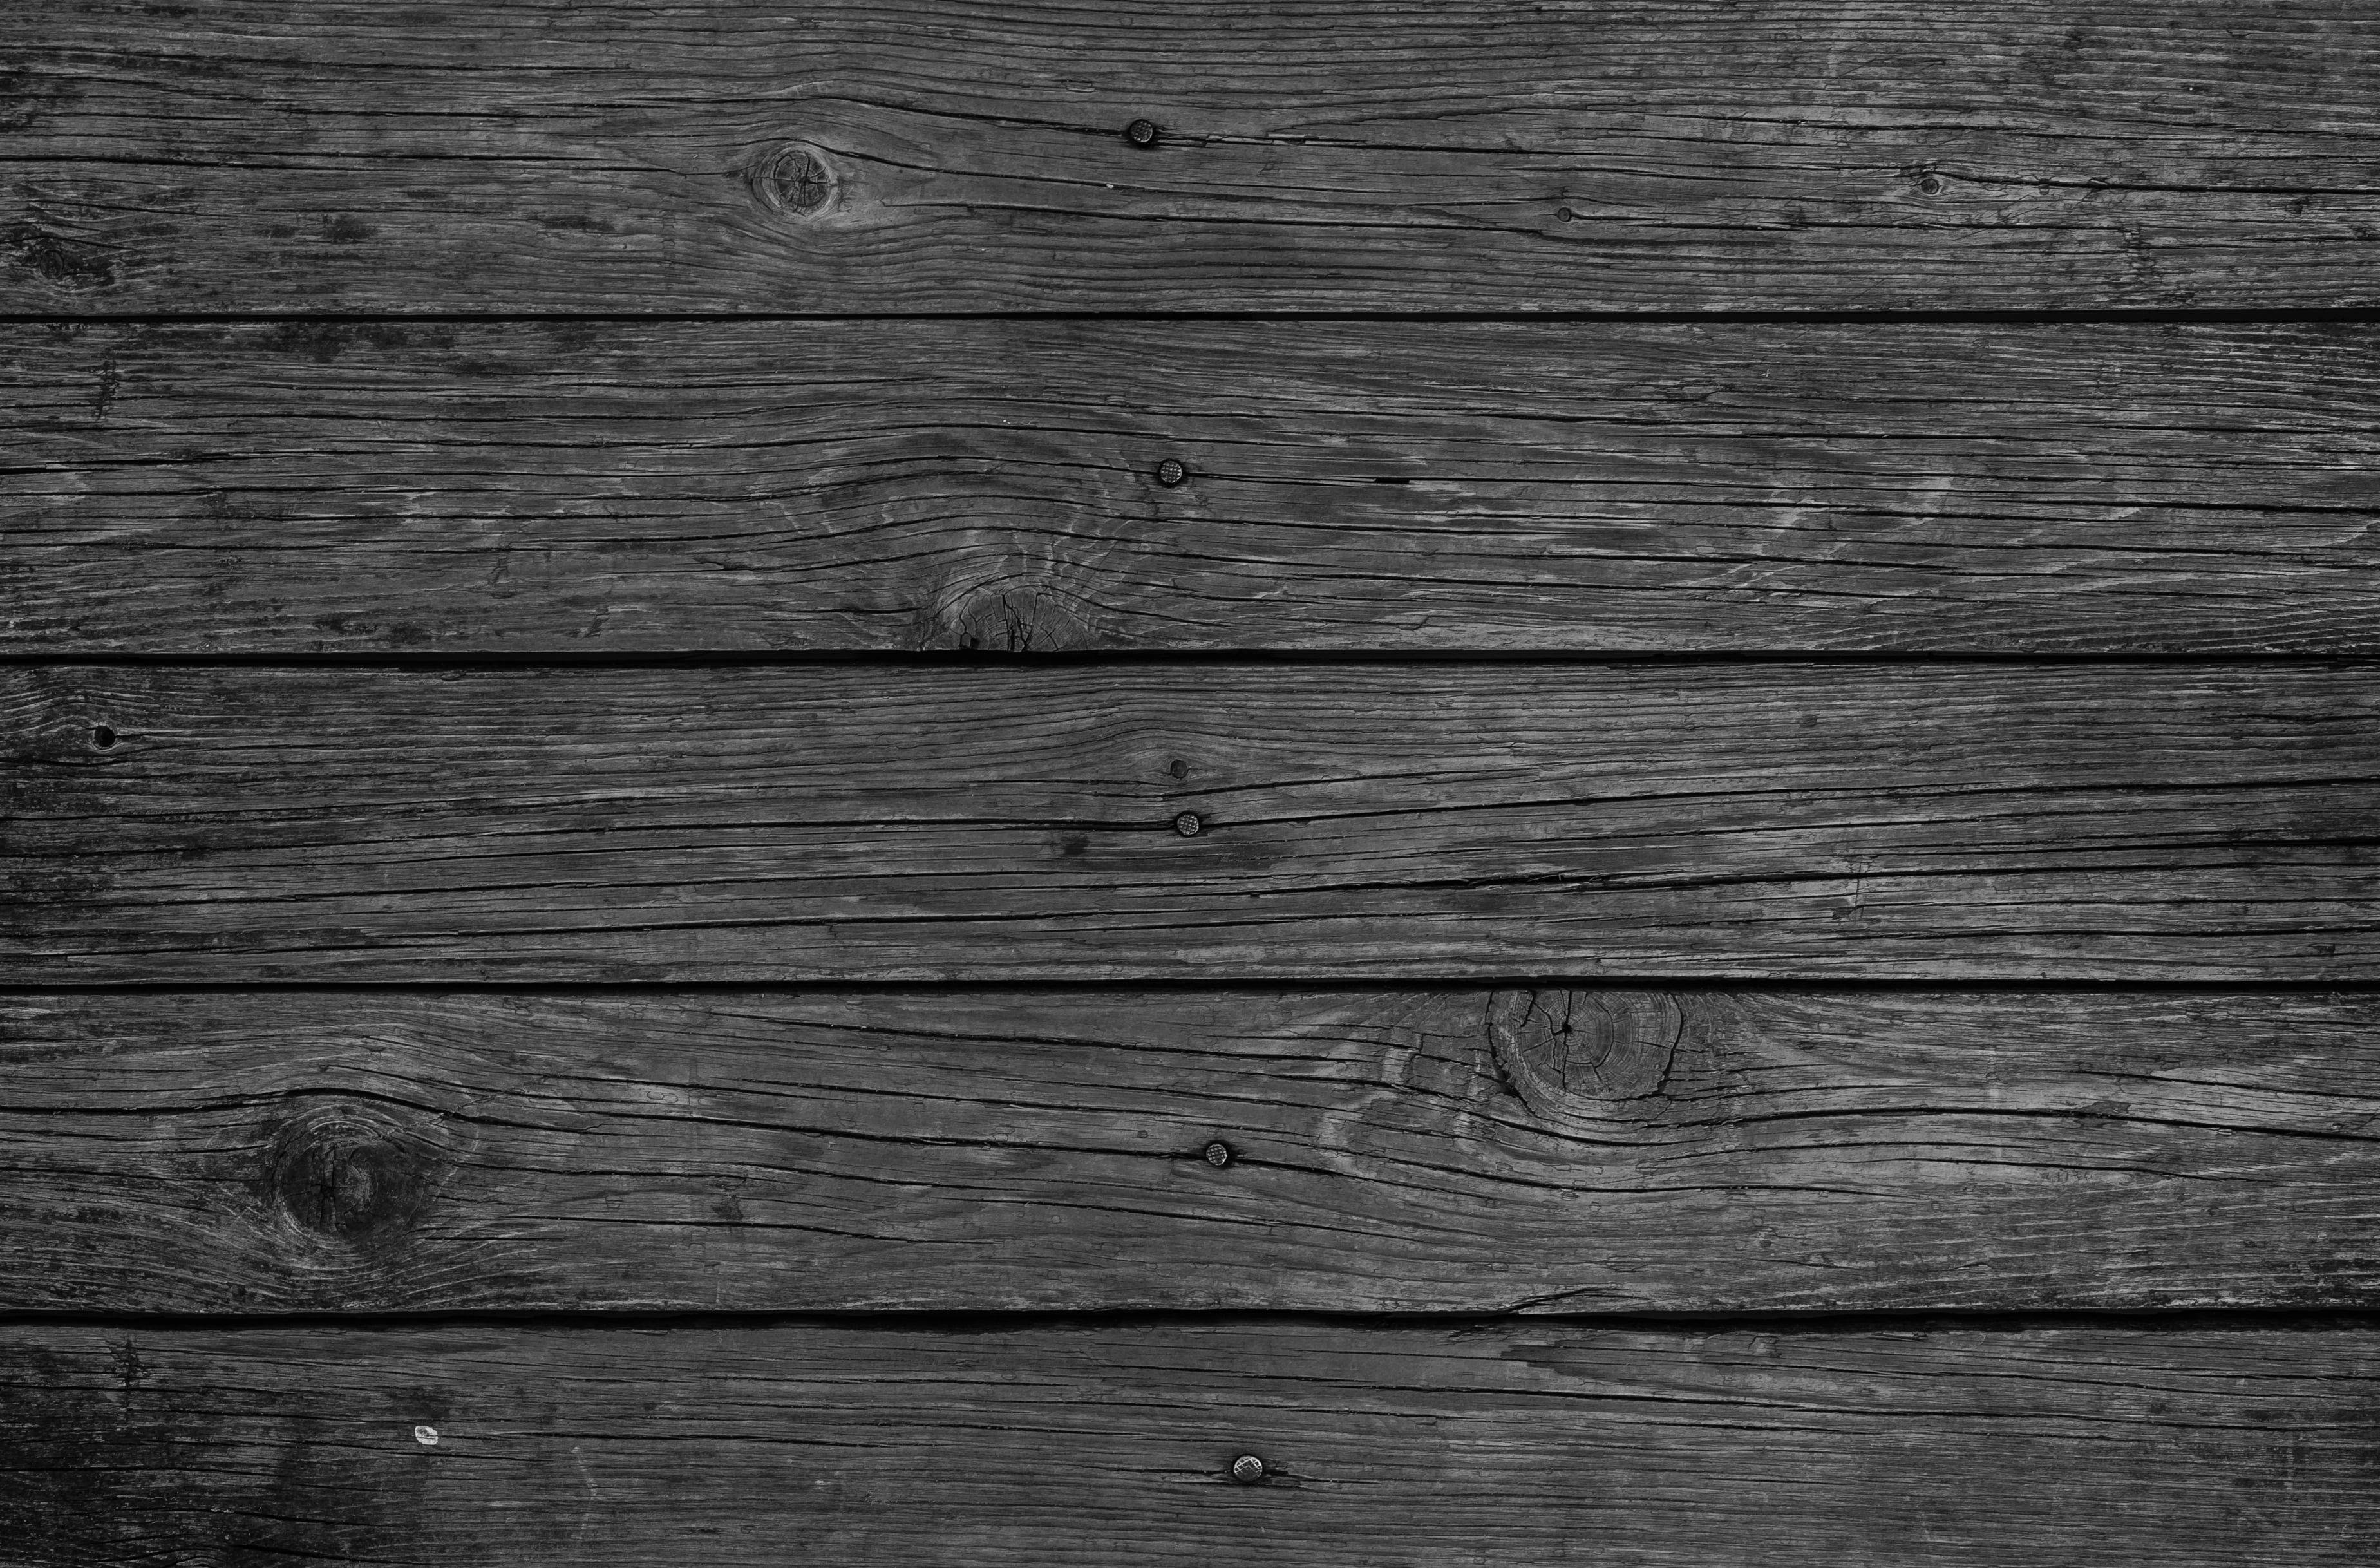 brown wooden surface #wall #black #wood #tables K #wallpaper #hdwallpaper #desktop. Wallpaper, Black wood texture, HD wallpaper